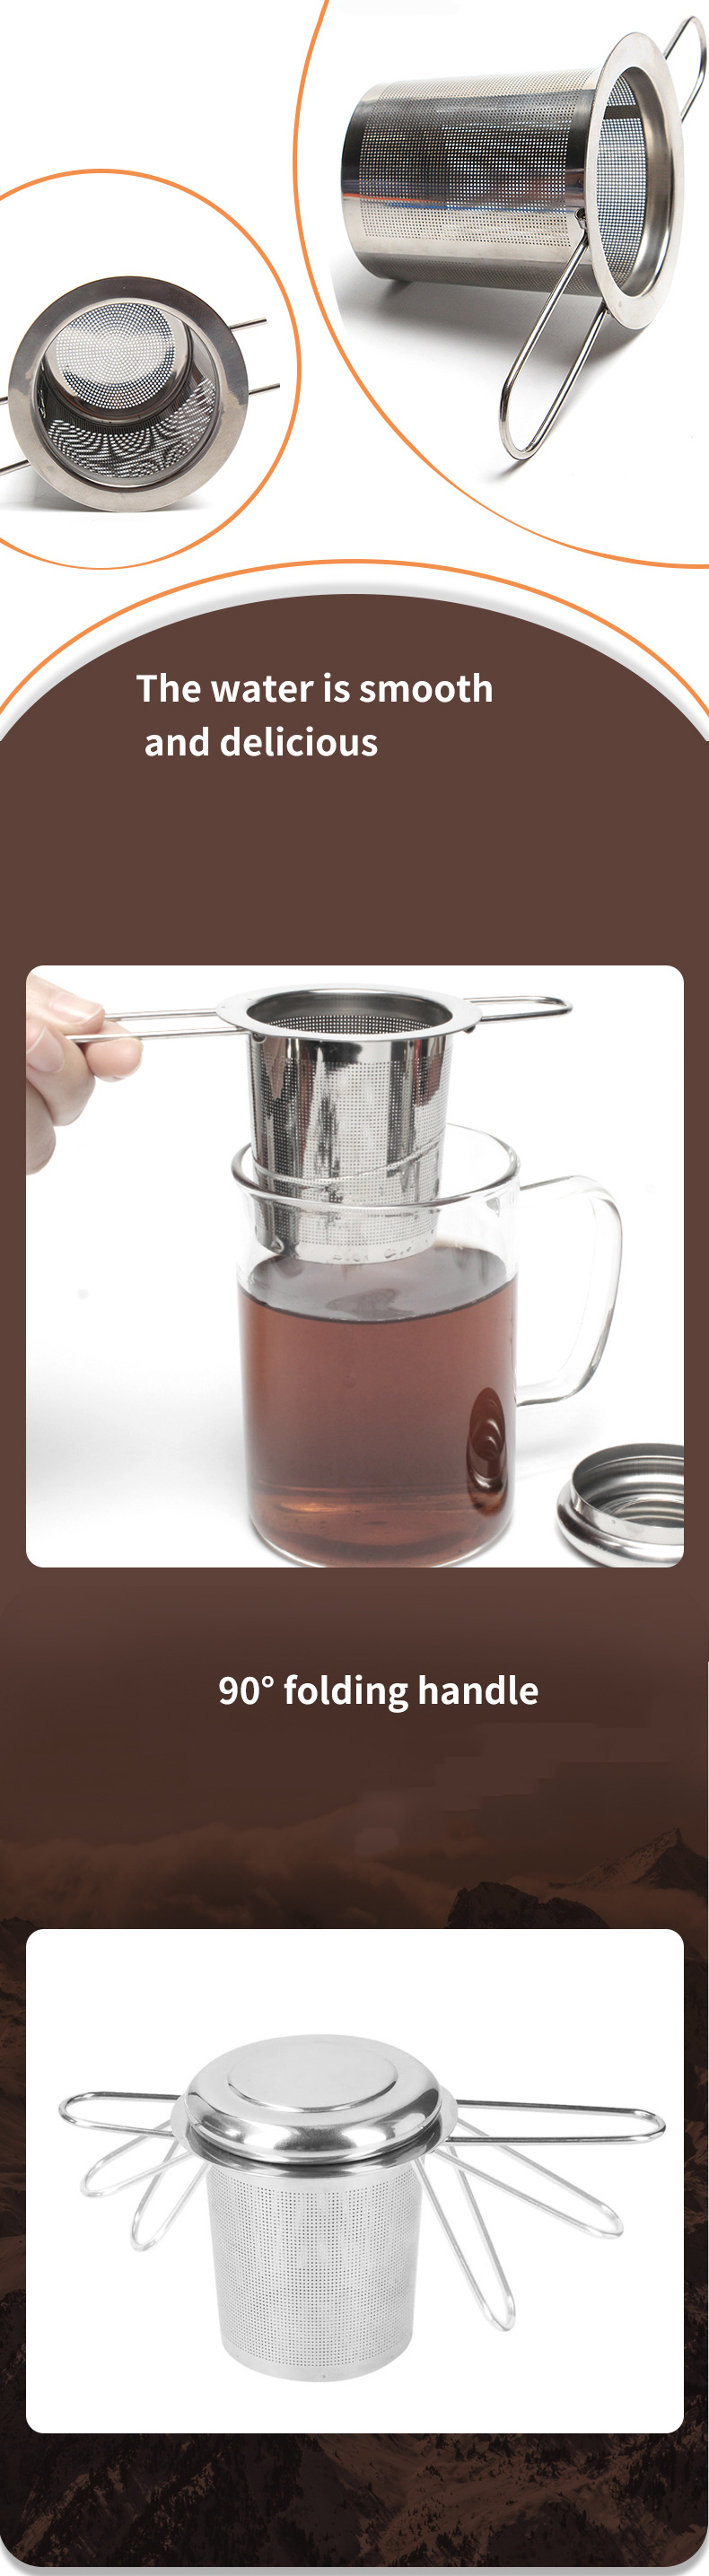 Creative tea maker with folding handle and stainless steel tea strainer-01.jpg